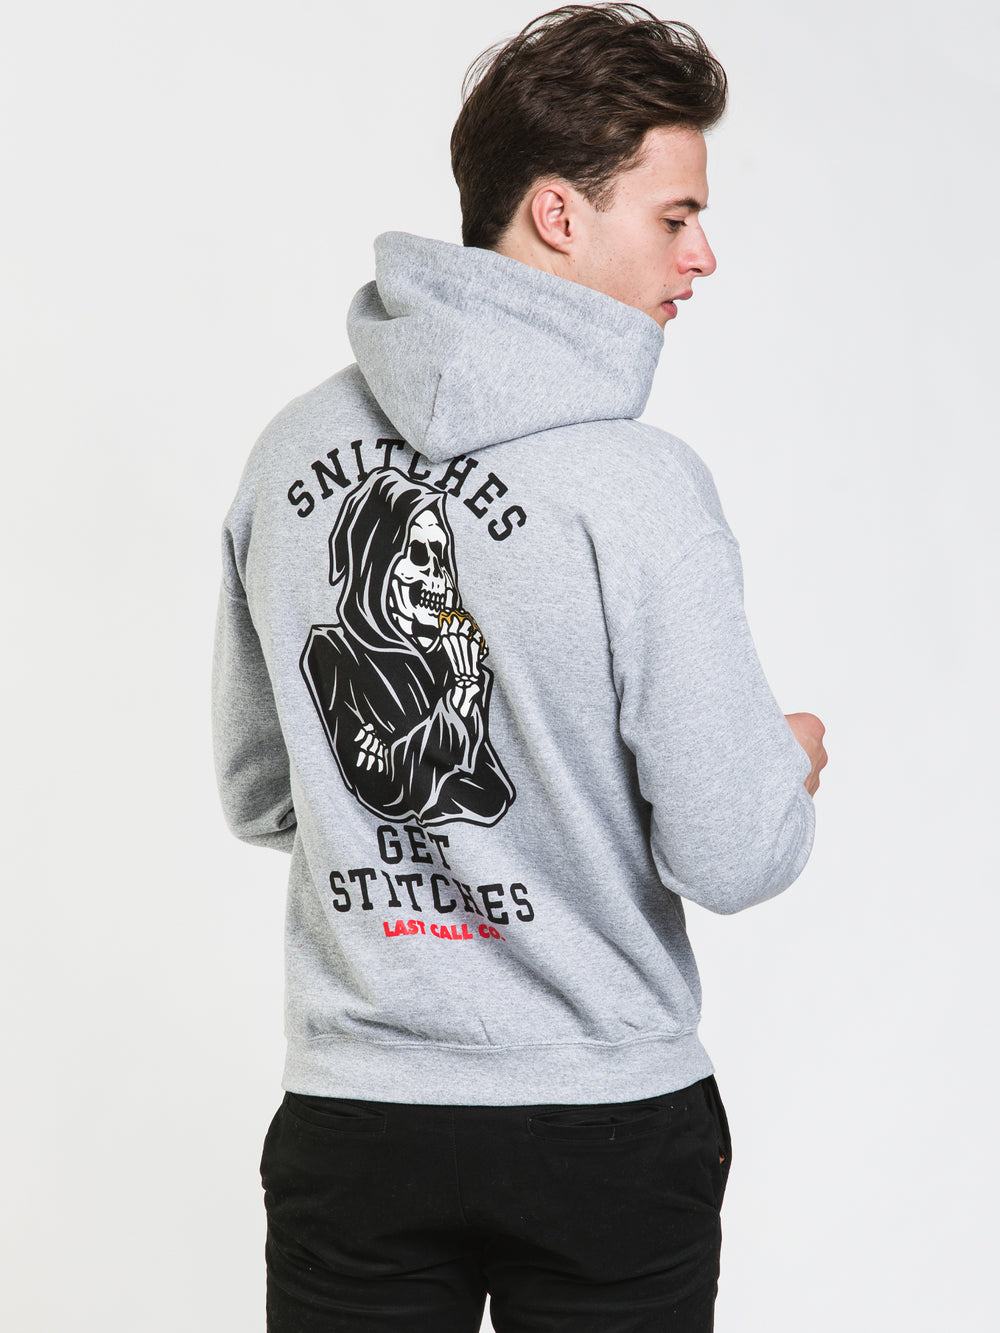 LAST CALL SNITCHES PULL OVER HOODIE - DÉSTOCKAGE